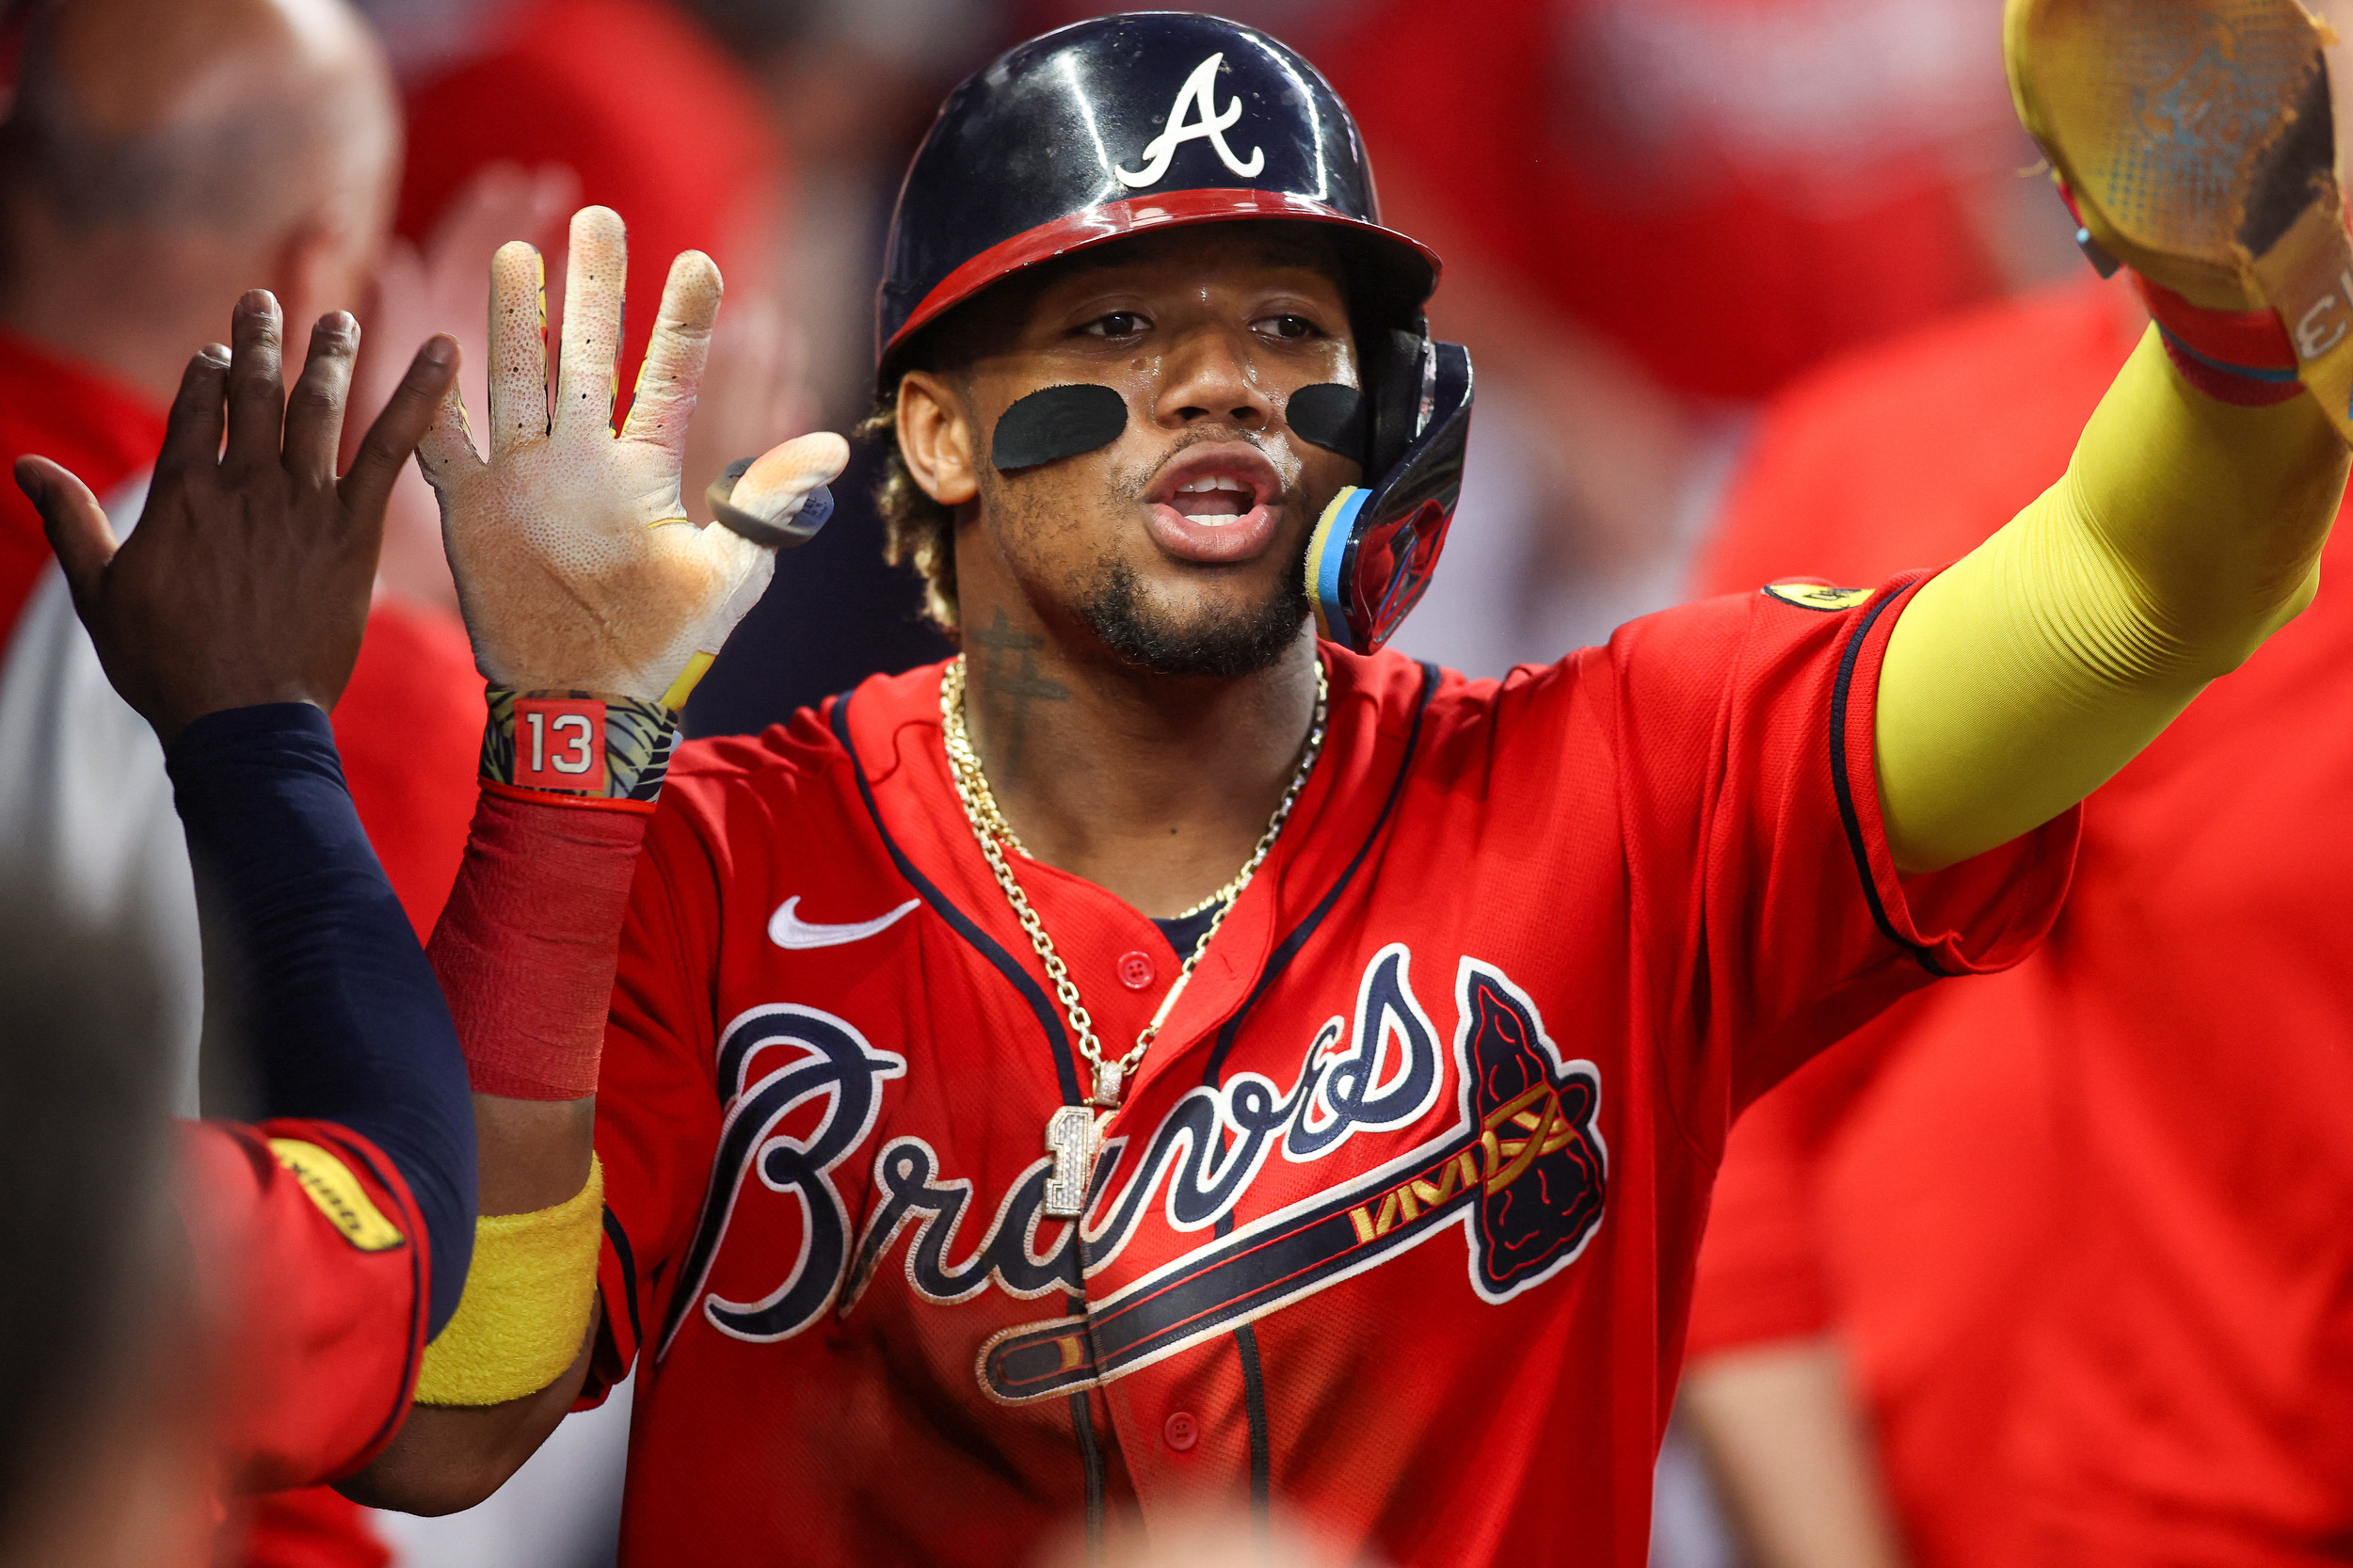 Braves sock six homers, rout Marlins for 6th straight win